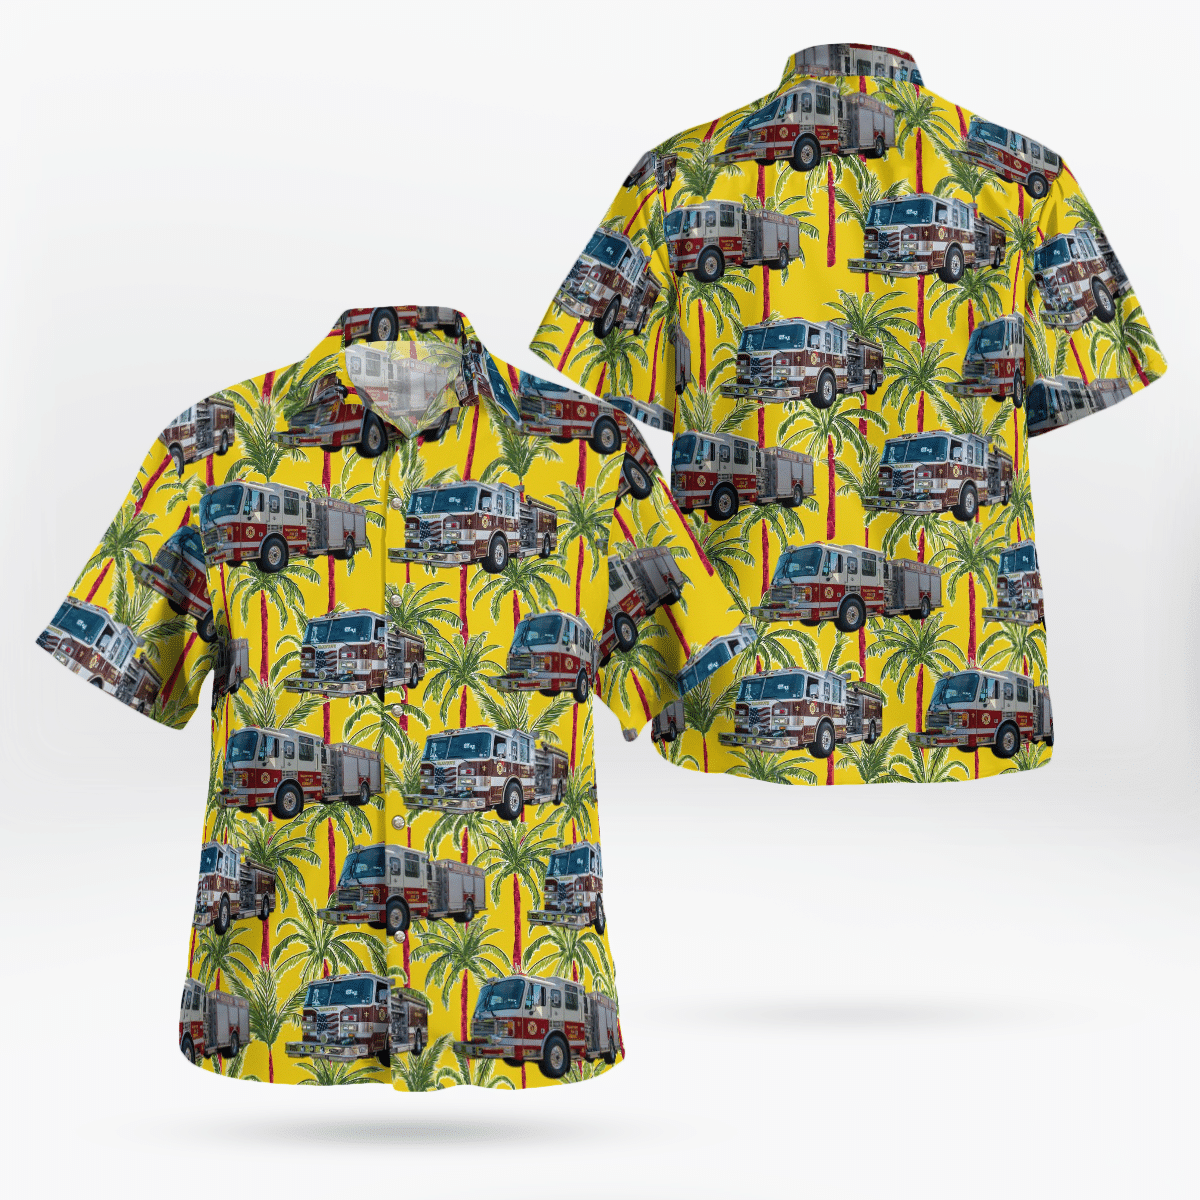 If you are in need of a new summertime look, pick up this Hawaiian shirt 265